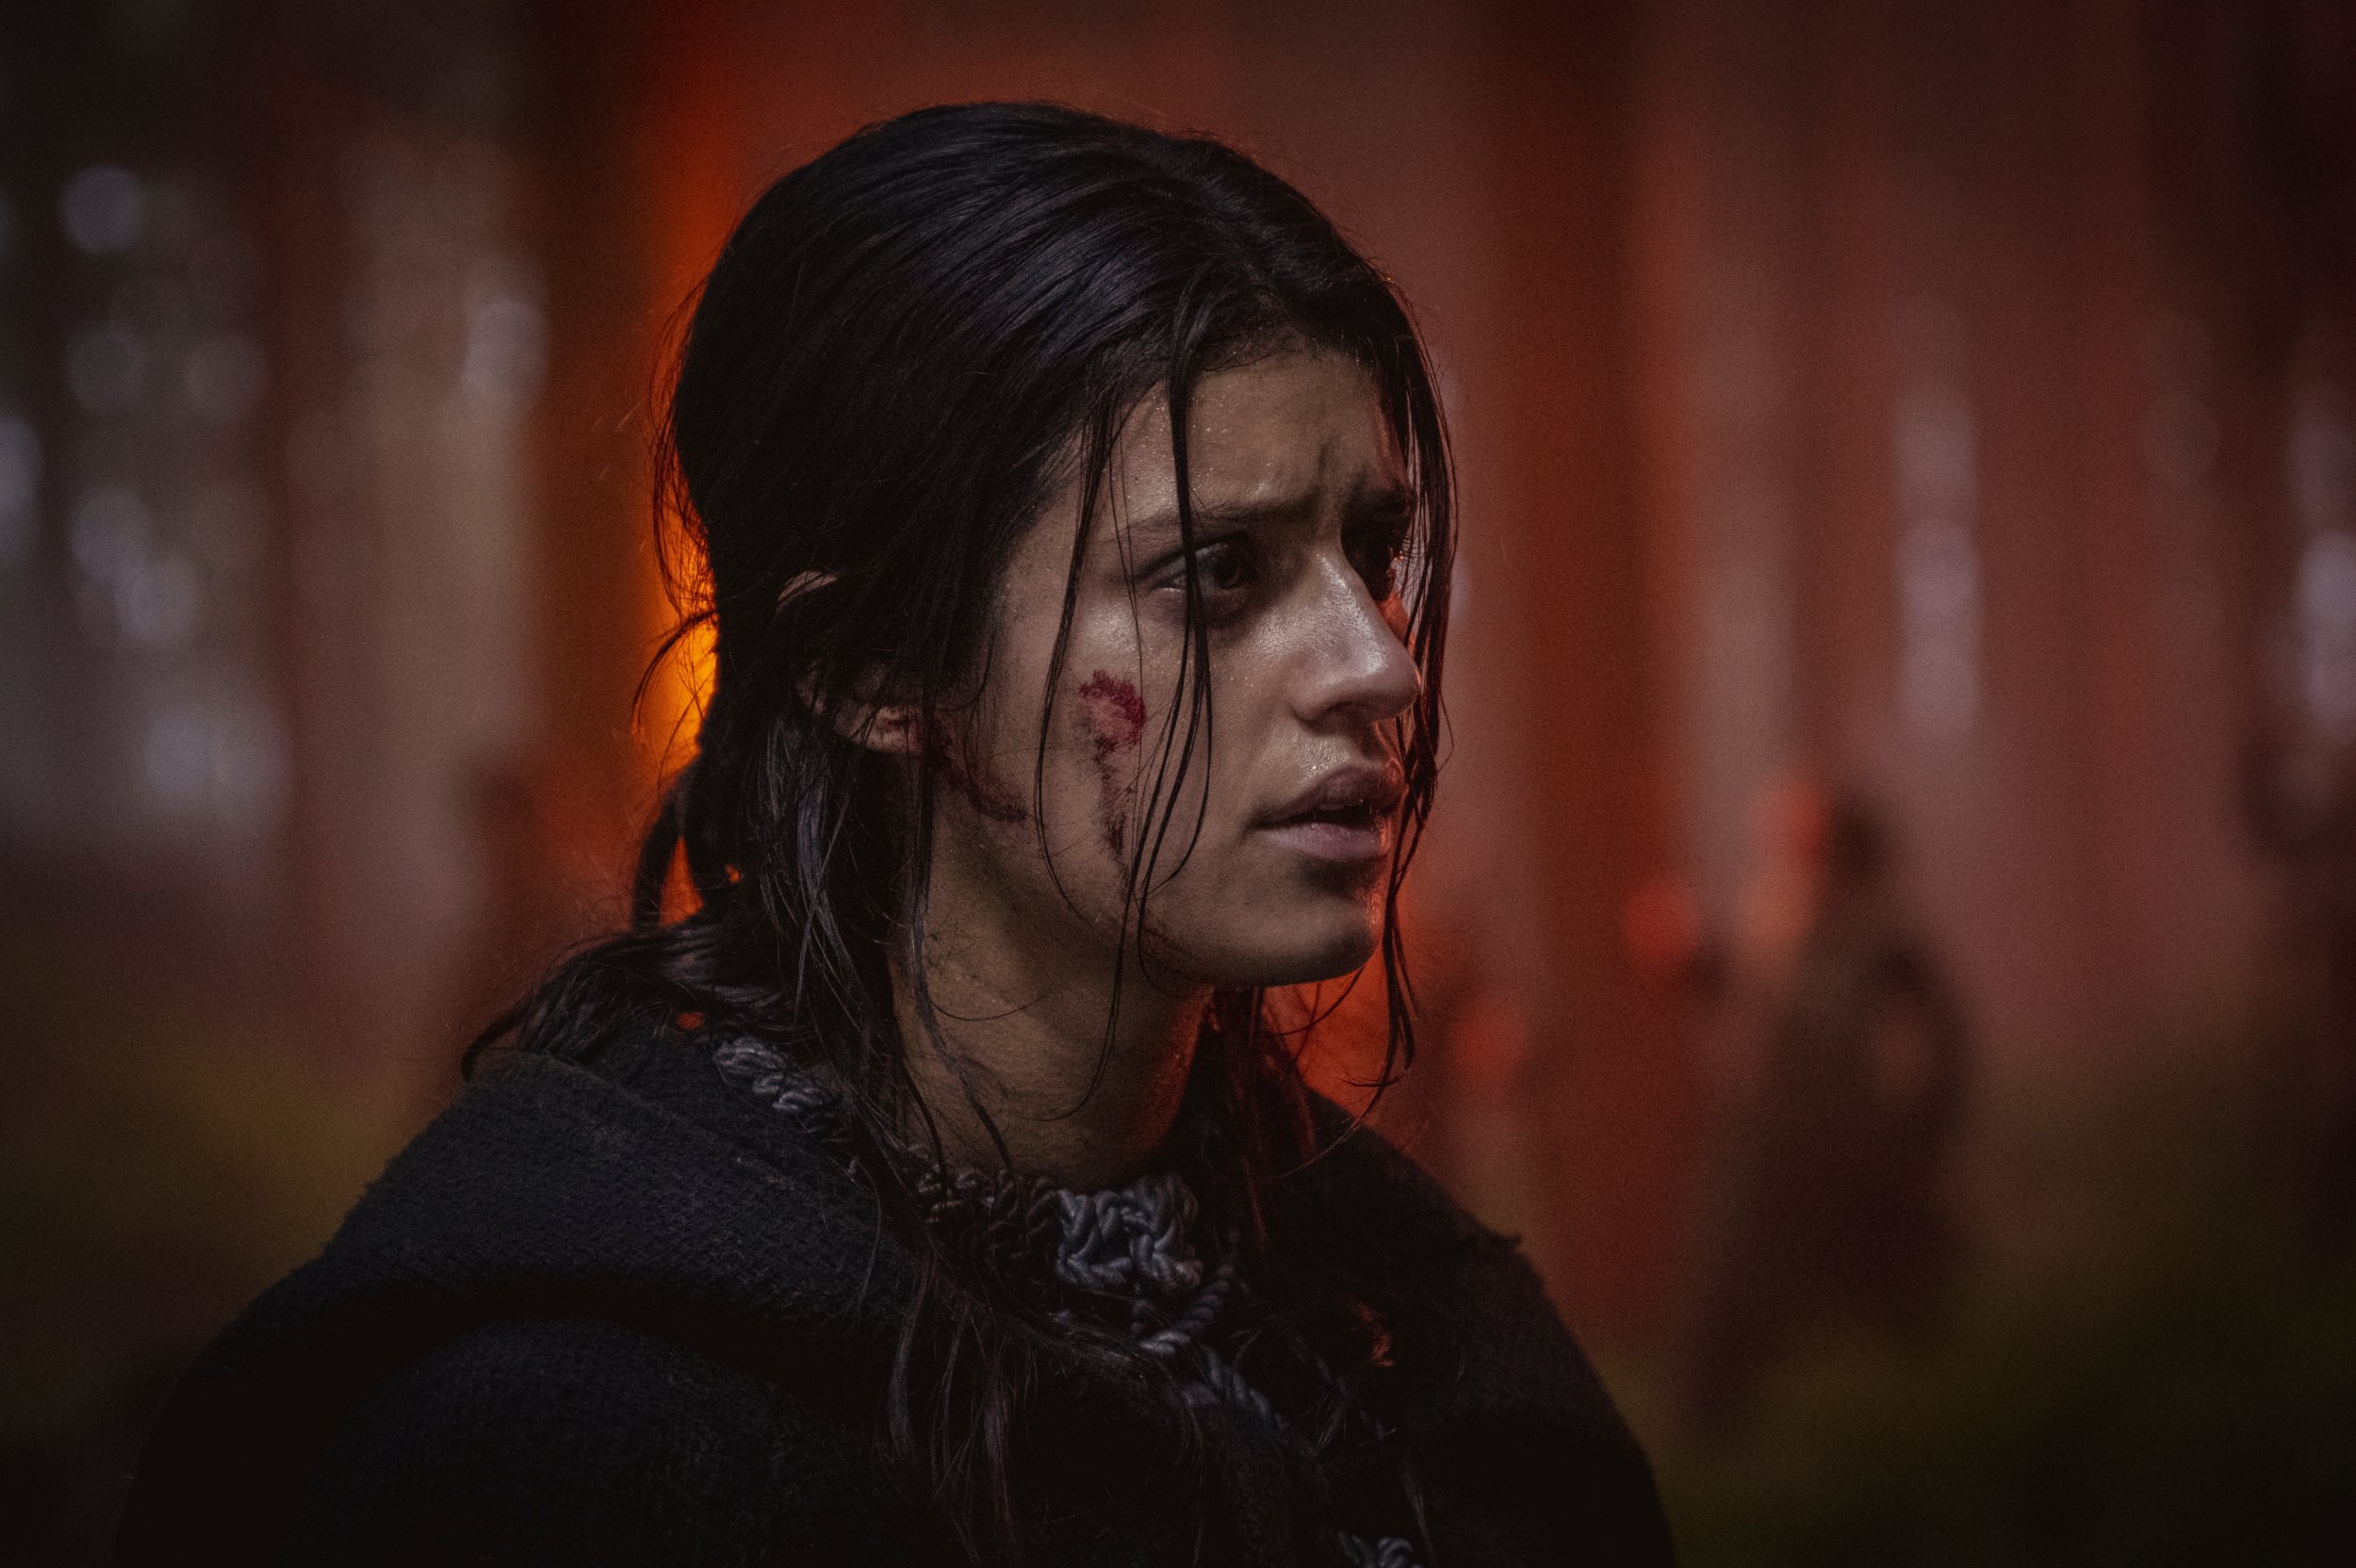 'The Witcher' Season 2 image of Yennefer of Vengerberg with blood on her face